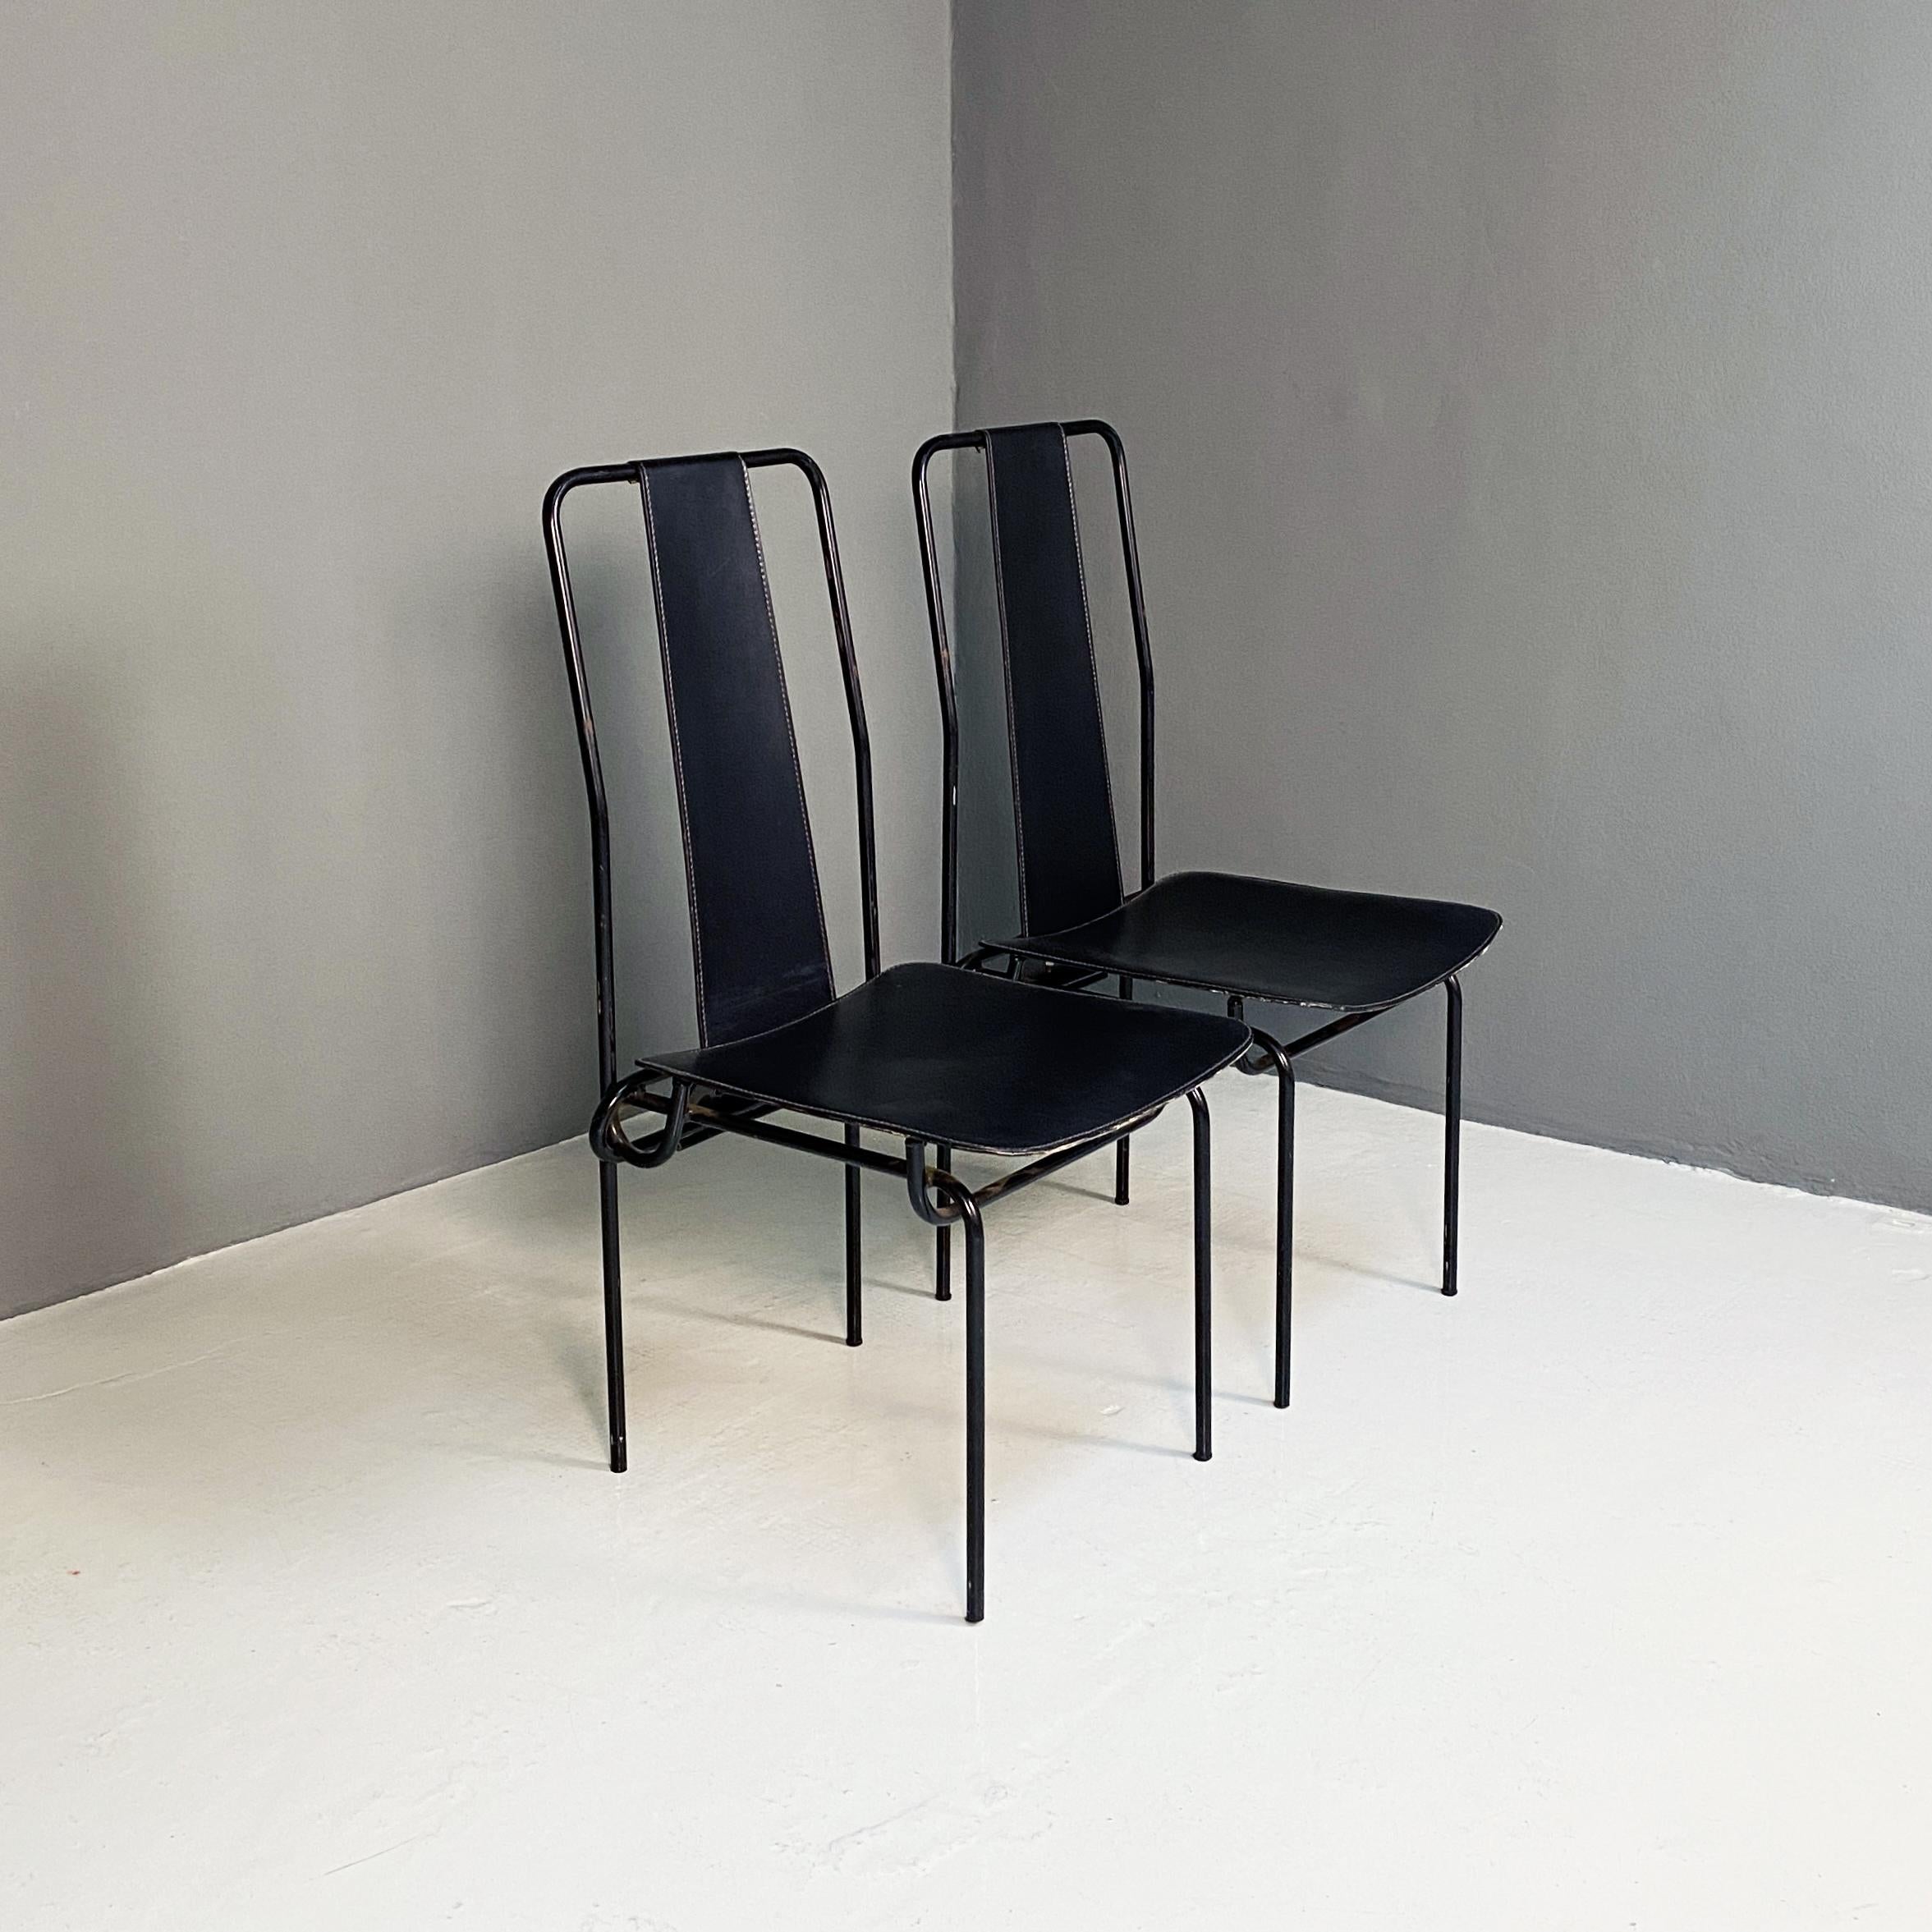 Italian modern Black chairs by Adalberto del Lago for Misura Emme, 1980s In Good Condition For Sale In MIlano, IT